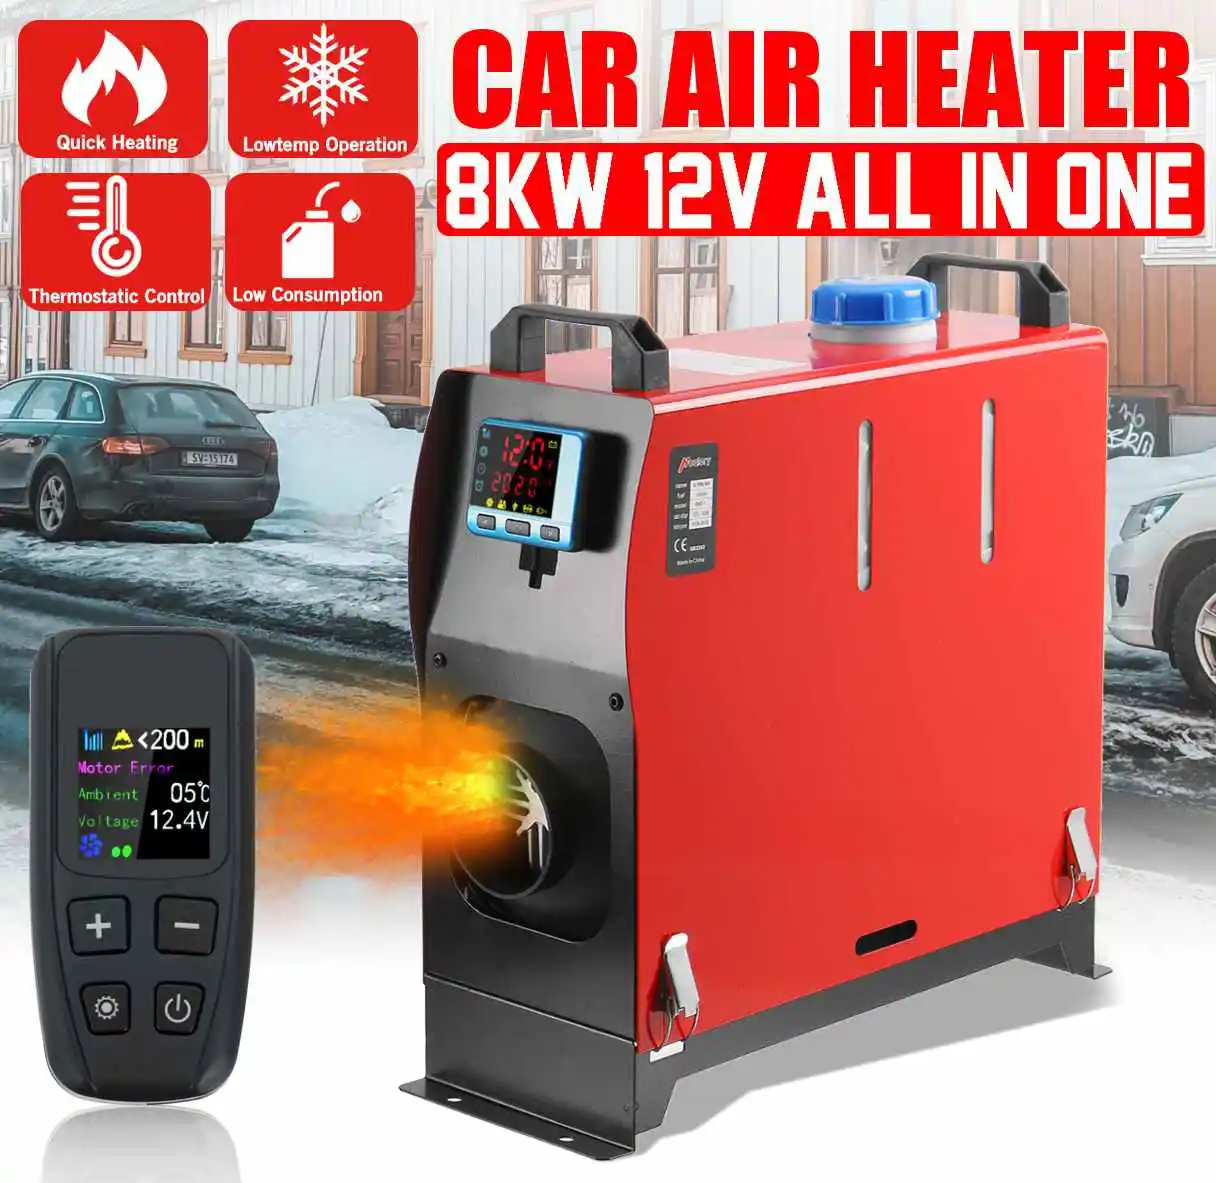 

All in One Unit 8KW 12V Car Heating Tool Diesel Air Heater Single Hole LCD Monitor Parking Warmer For Car Truck Bus Boat RV